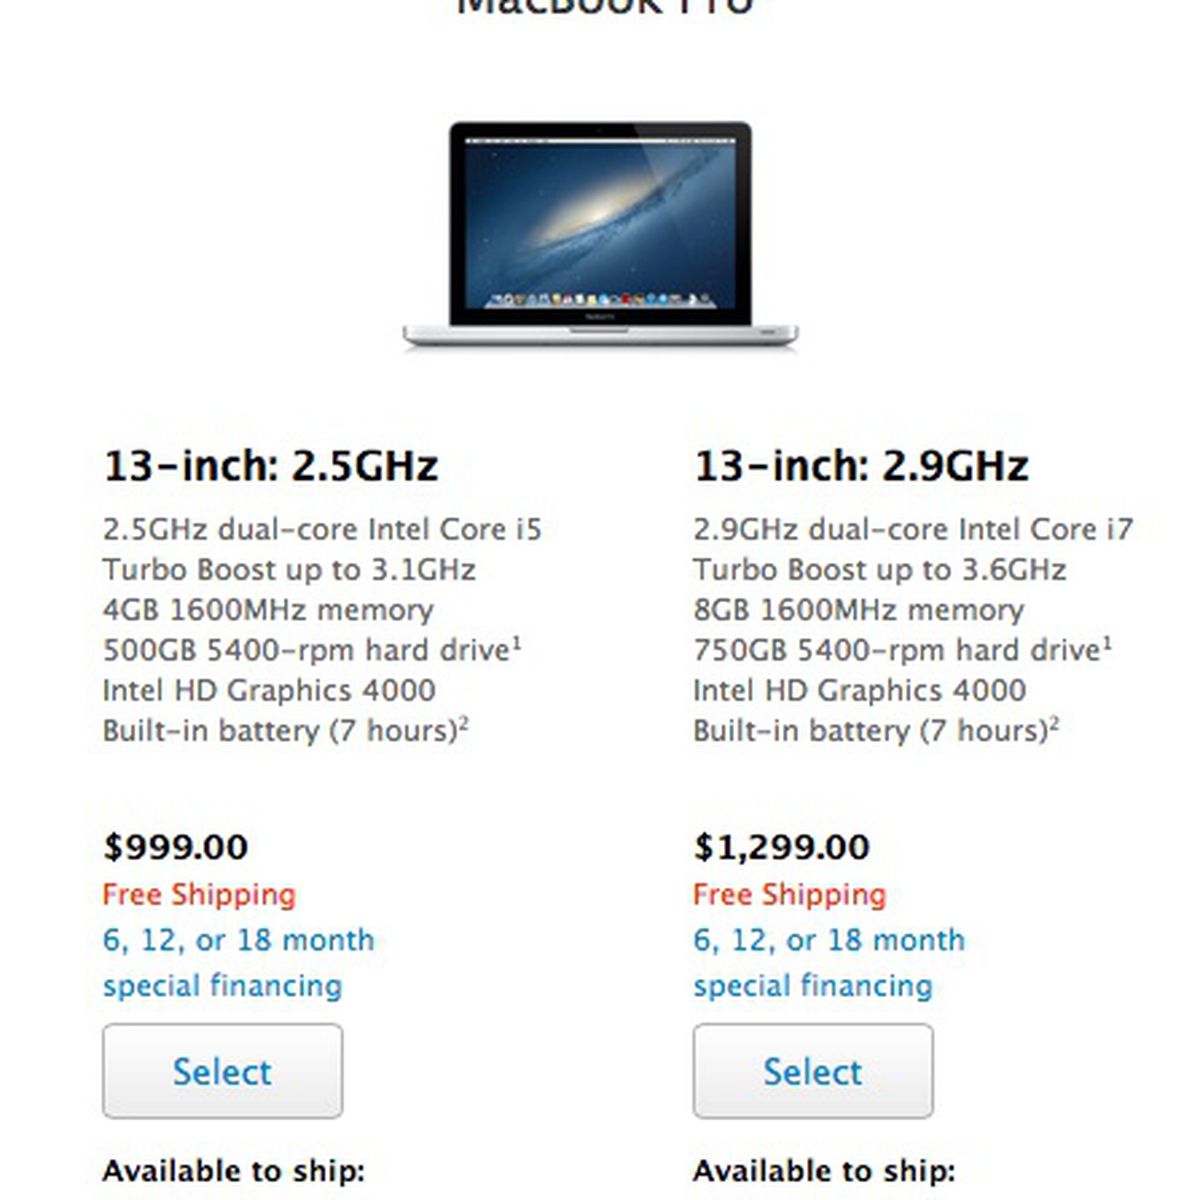 Apple education prices for macbook pro vs regular super simple song